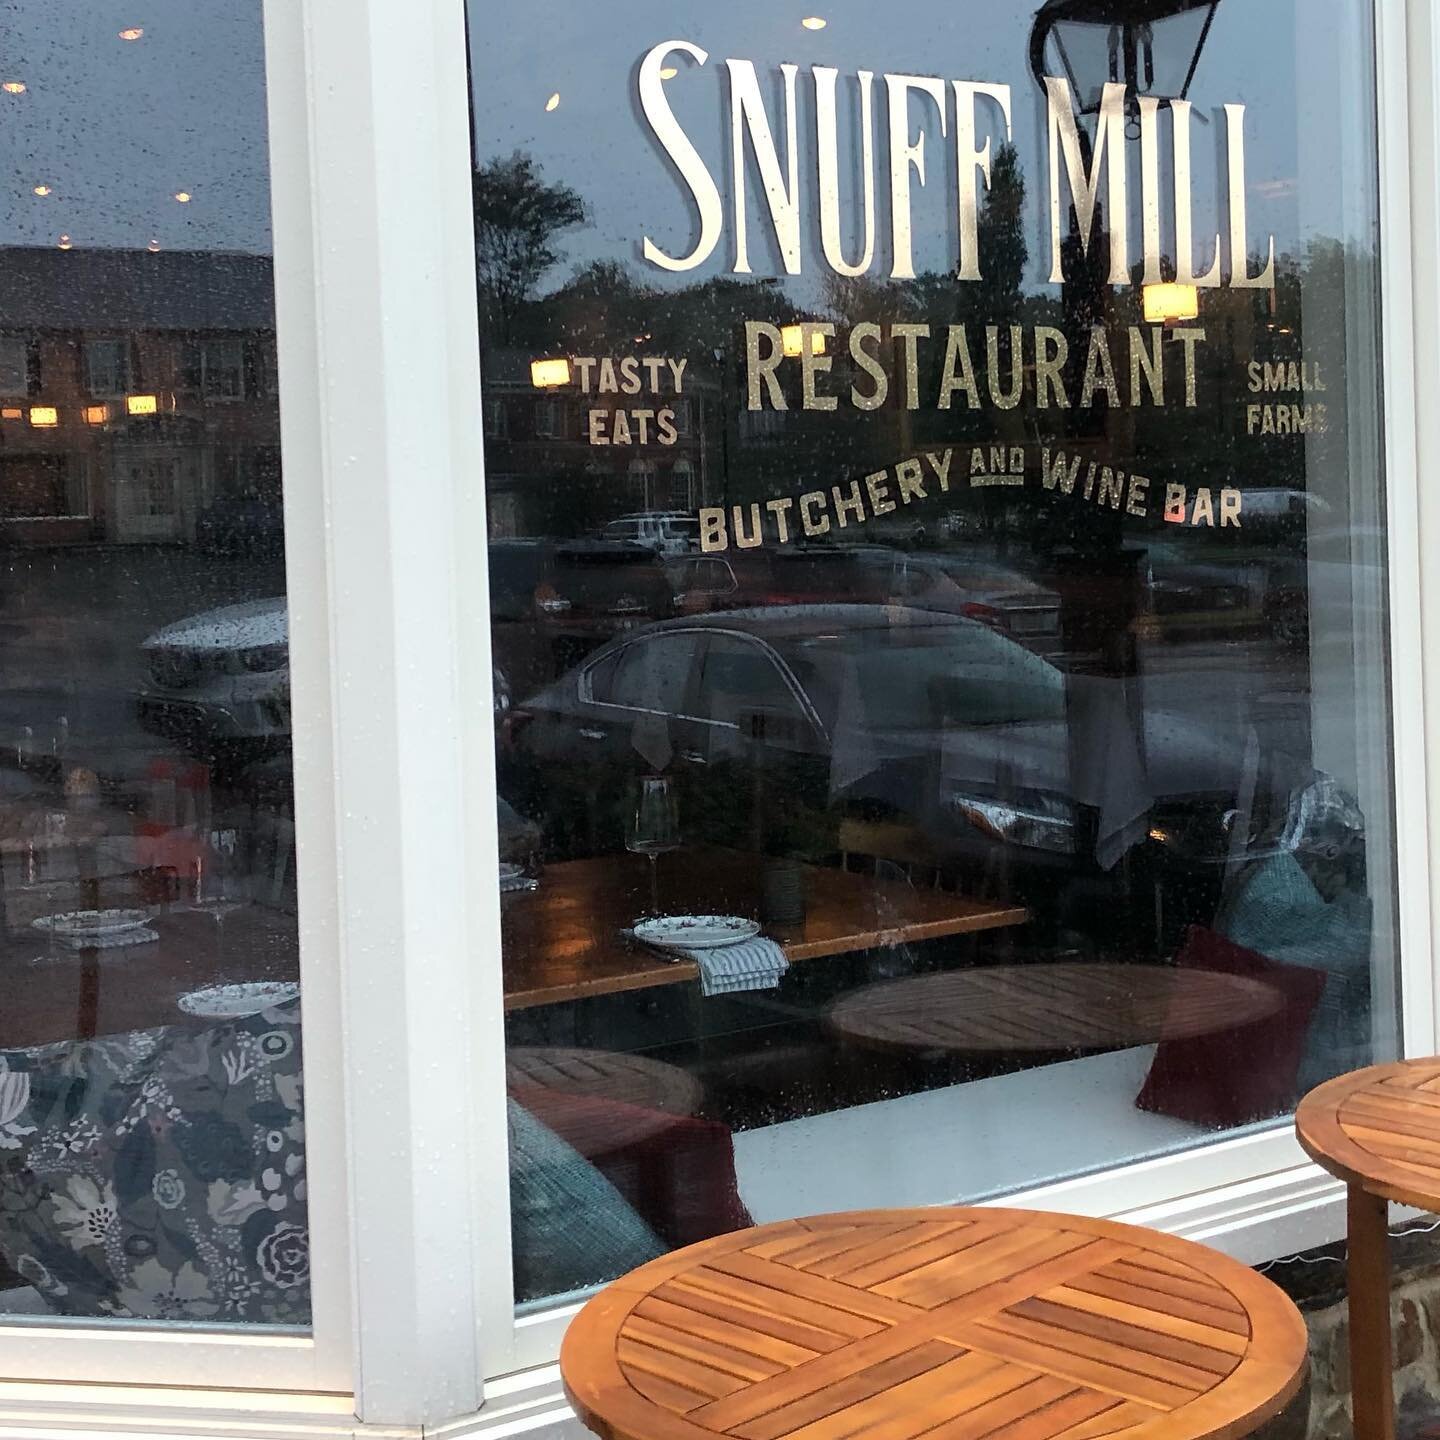 Well here&rsquo;s your chance to get into Snuff Mill!  We&rsquo;ve had many cancellations due to the weather this evening so this gives you an great opportunity to snag a seat. Go to www.snuffmillbutchery.com and click on the reserve button to make y